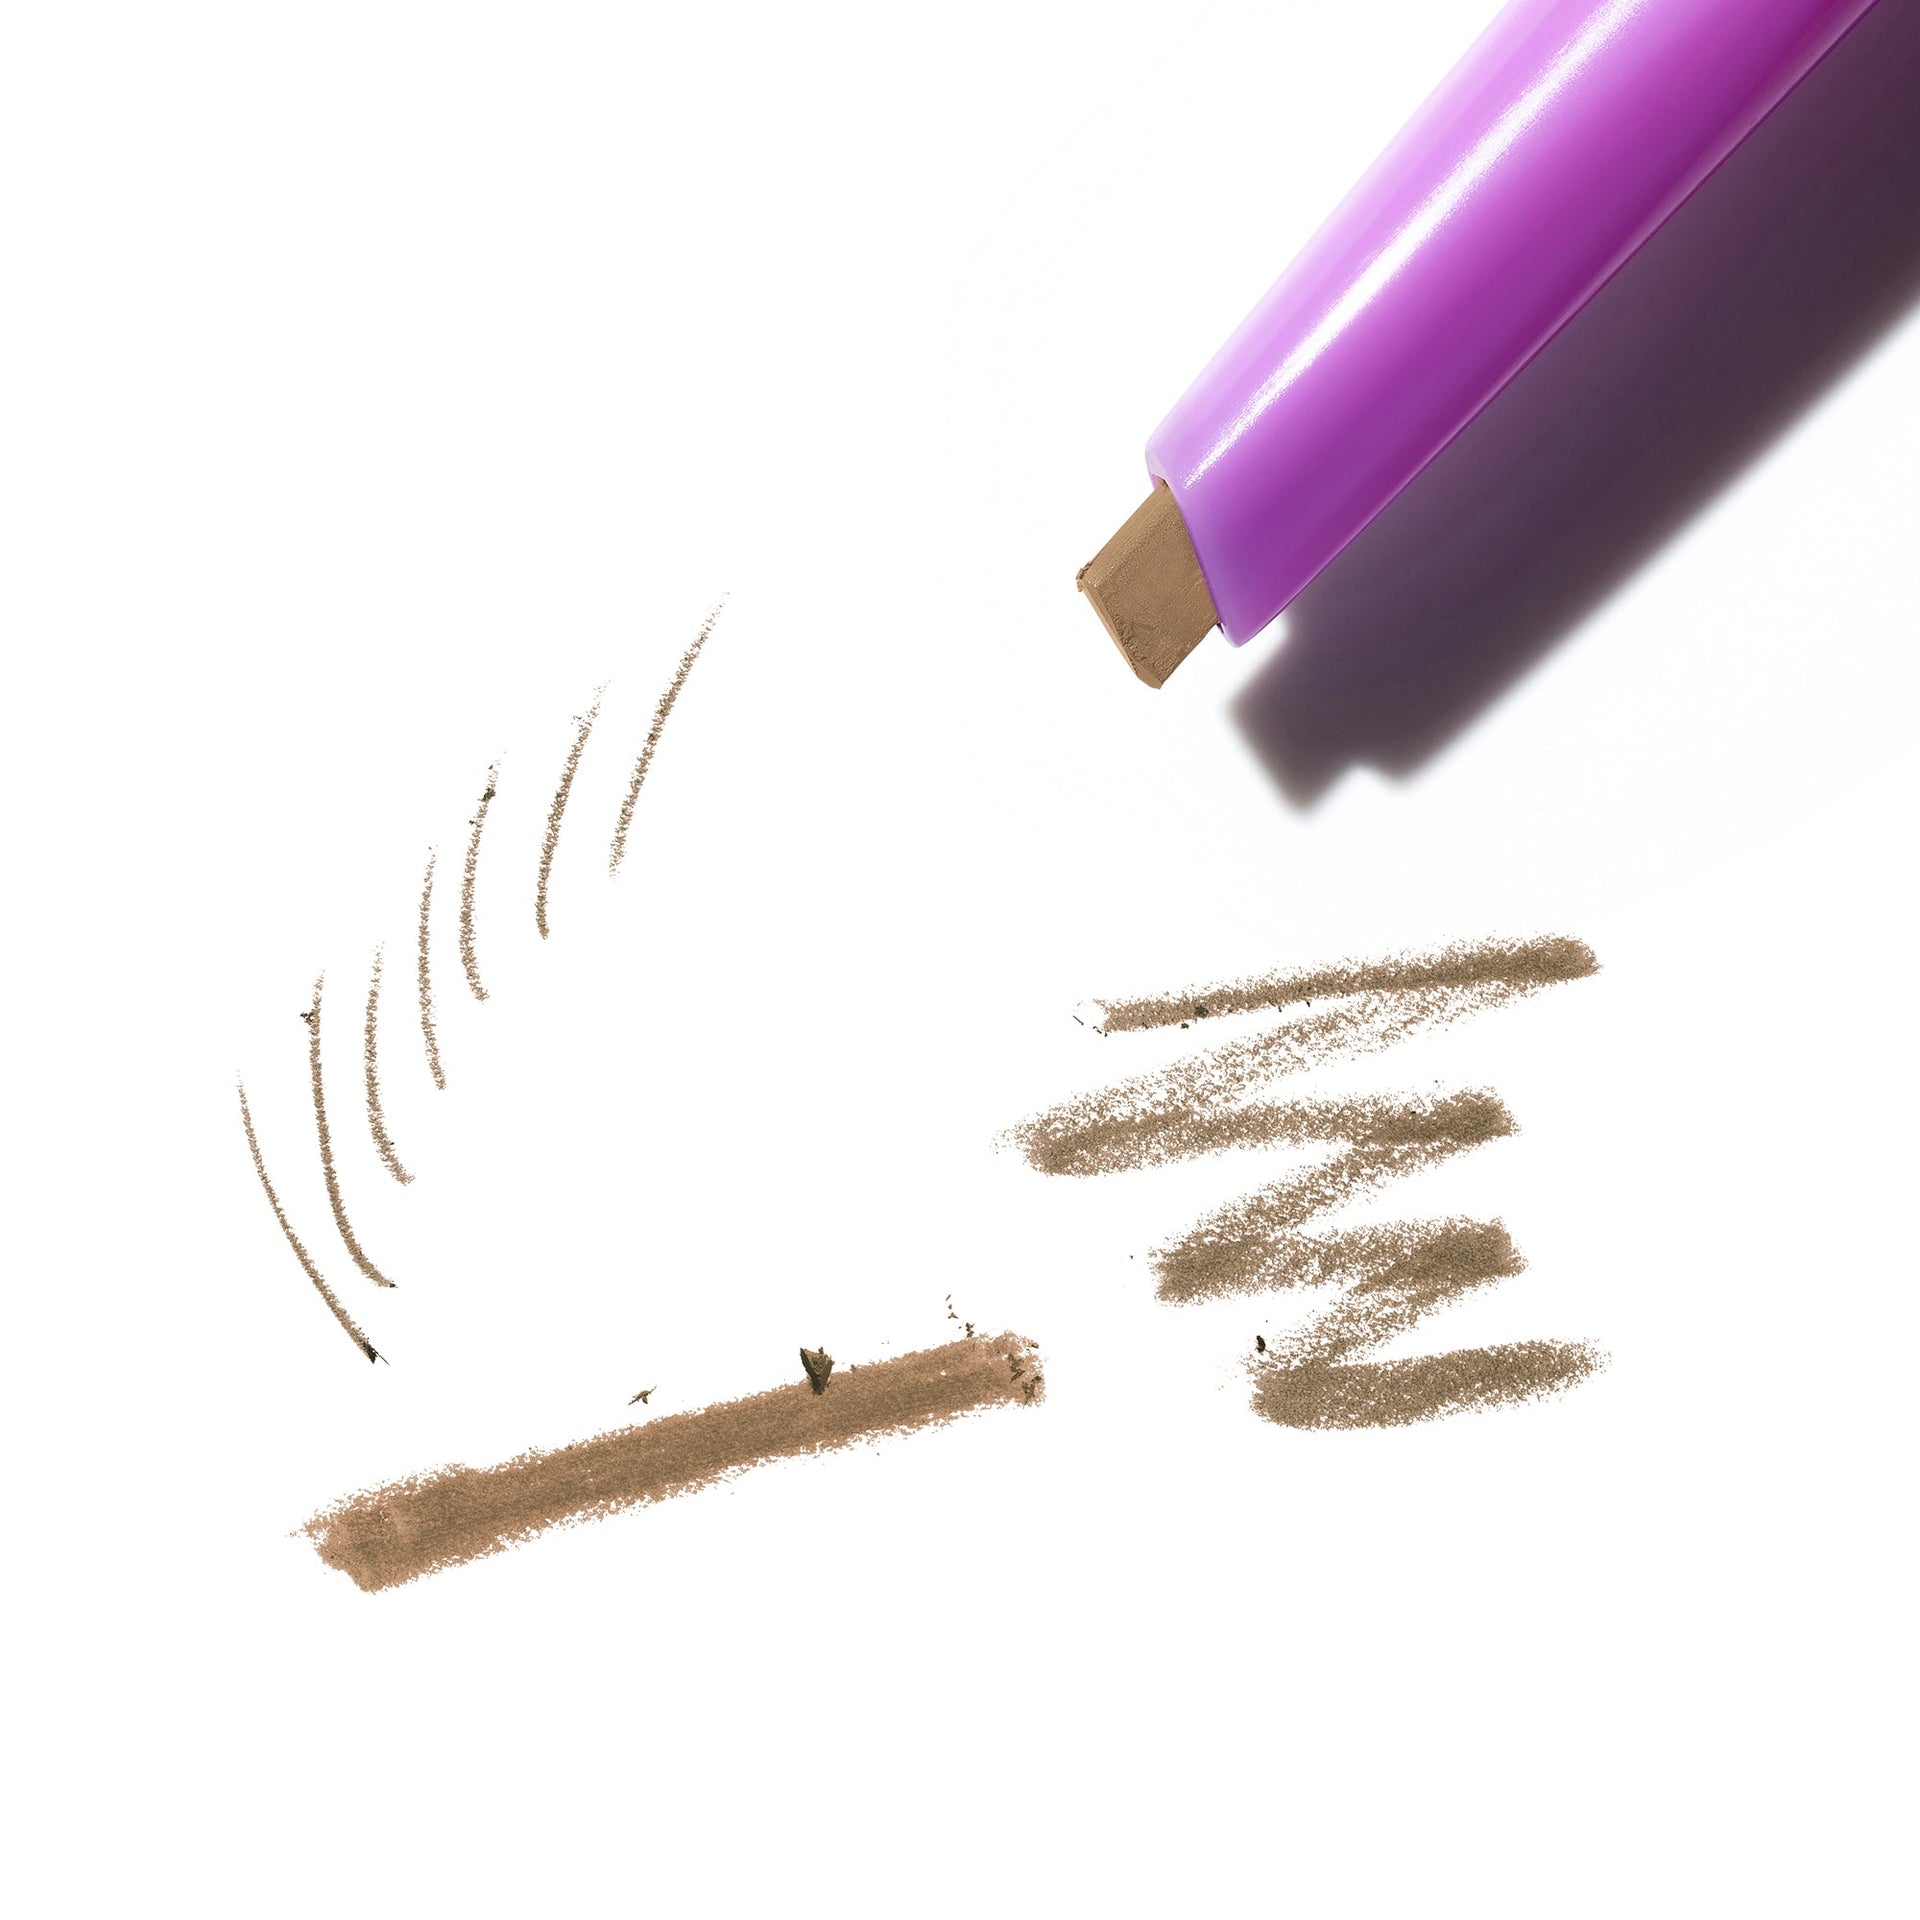 Taupe Brow Pop - Tip creates diverse Strokes & Lines.